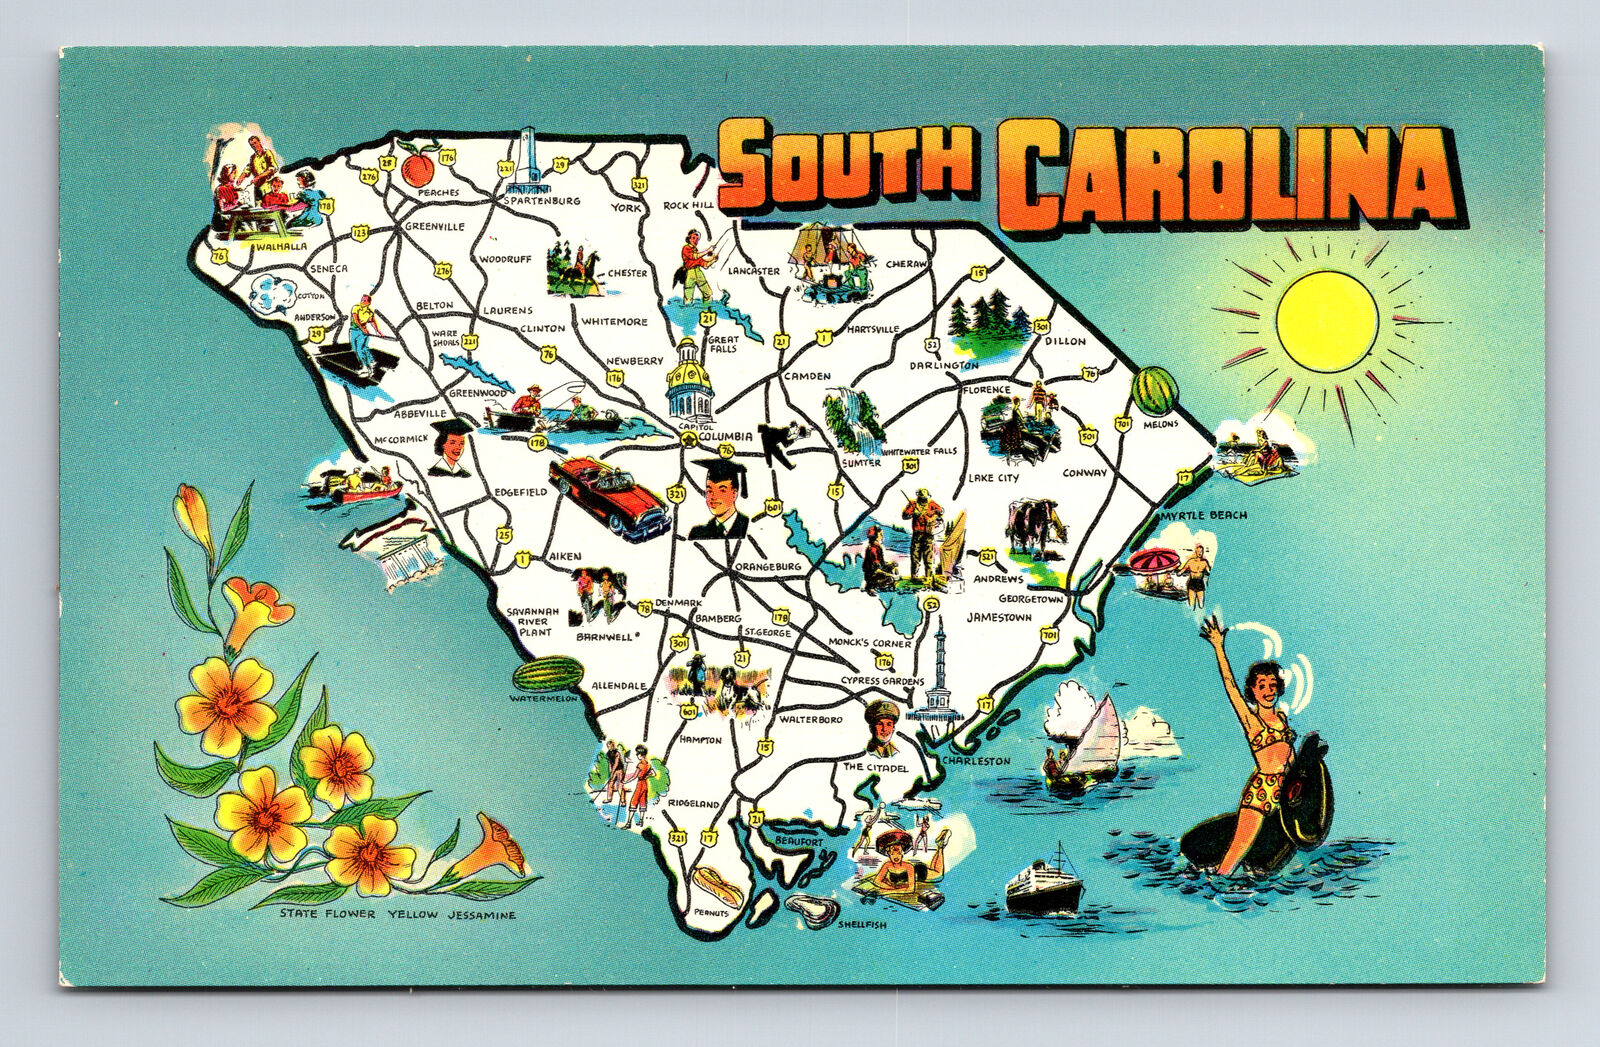 Pictorial Tourist Map State Flower Greetings South Carolina SC Postcard